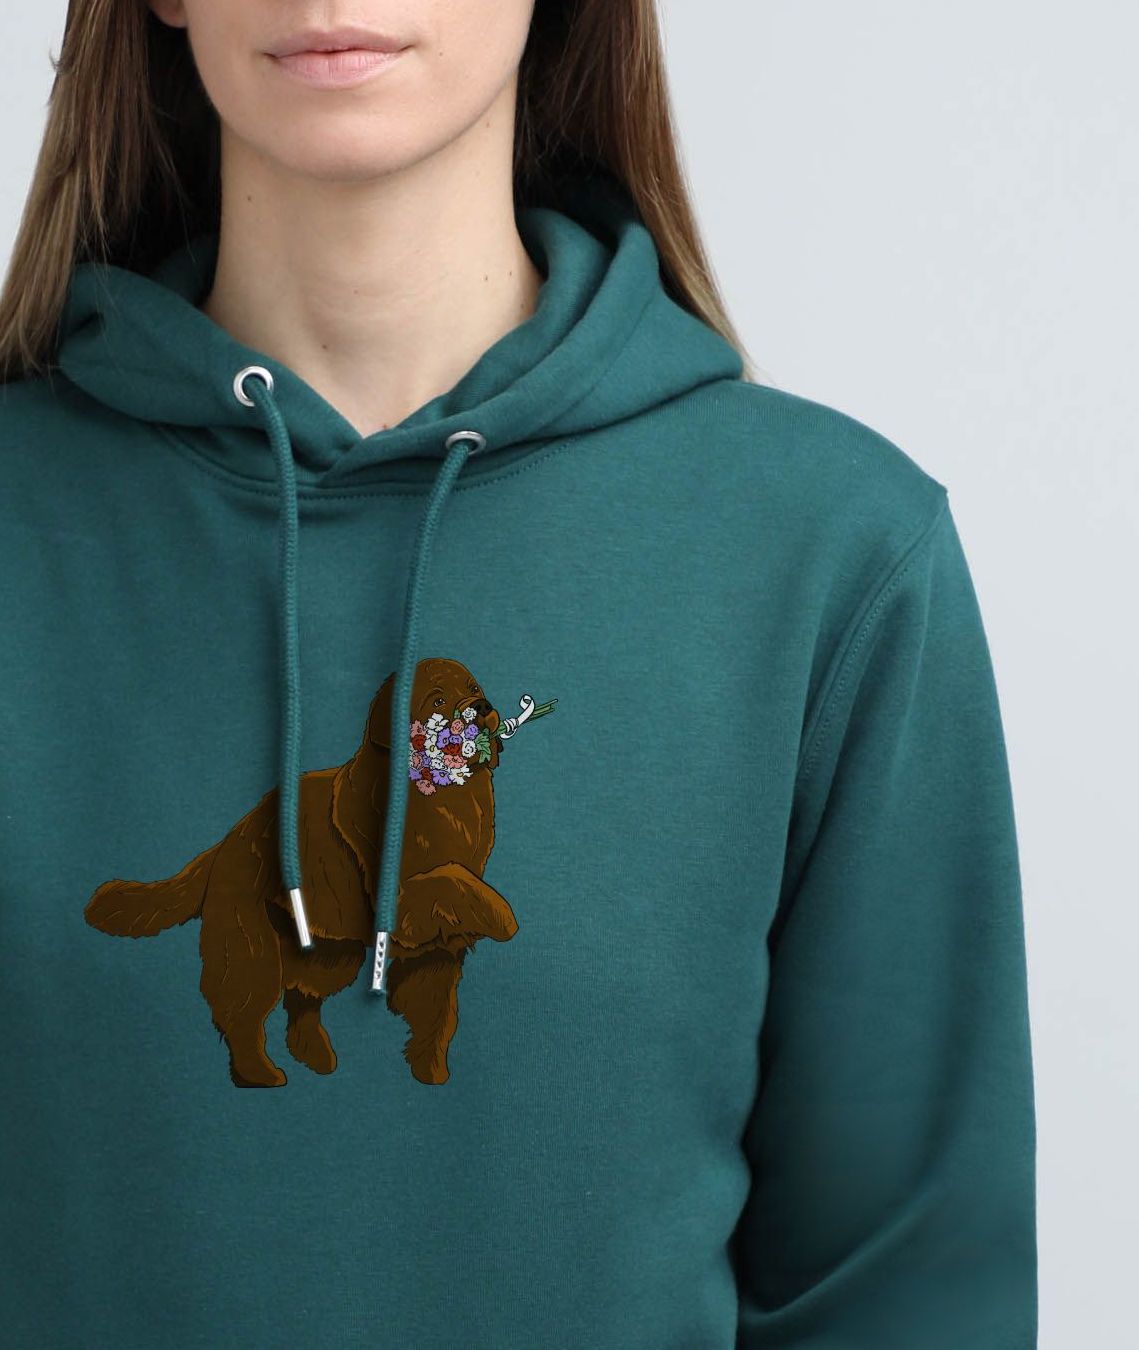 Giant dog with flowers | Hoodie with dog. Regular fit | Unisex - premium dog goods handmade in Europe by My Wild Other